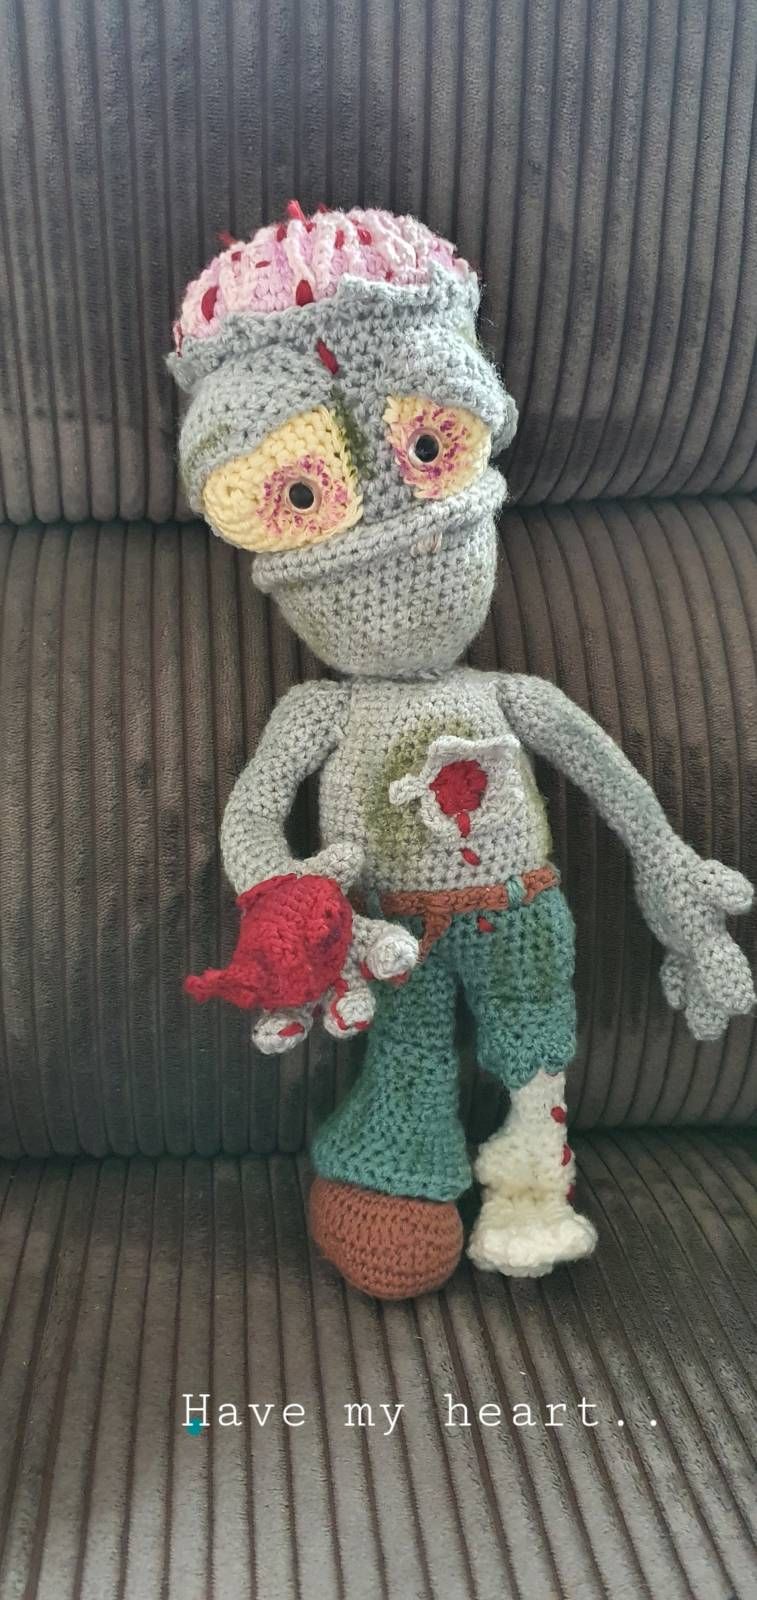 Amigurumi Zombie Crochet Pattern Review for Cottontail and Whiskers by Mirjam Zonneveld